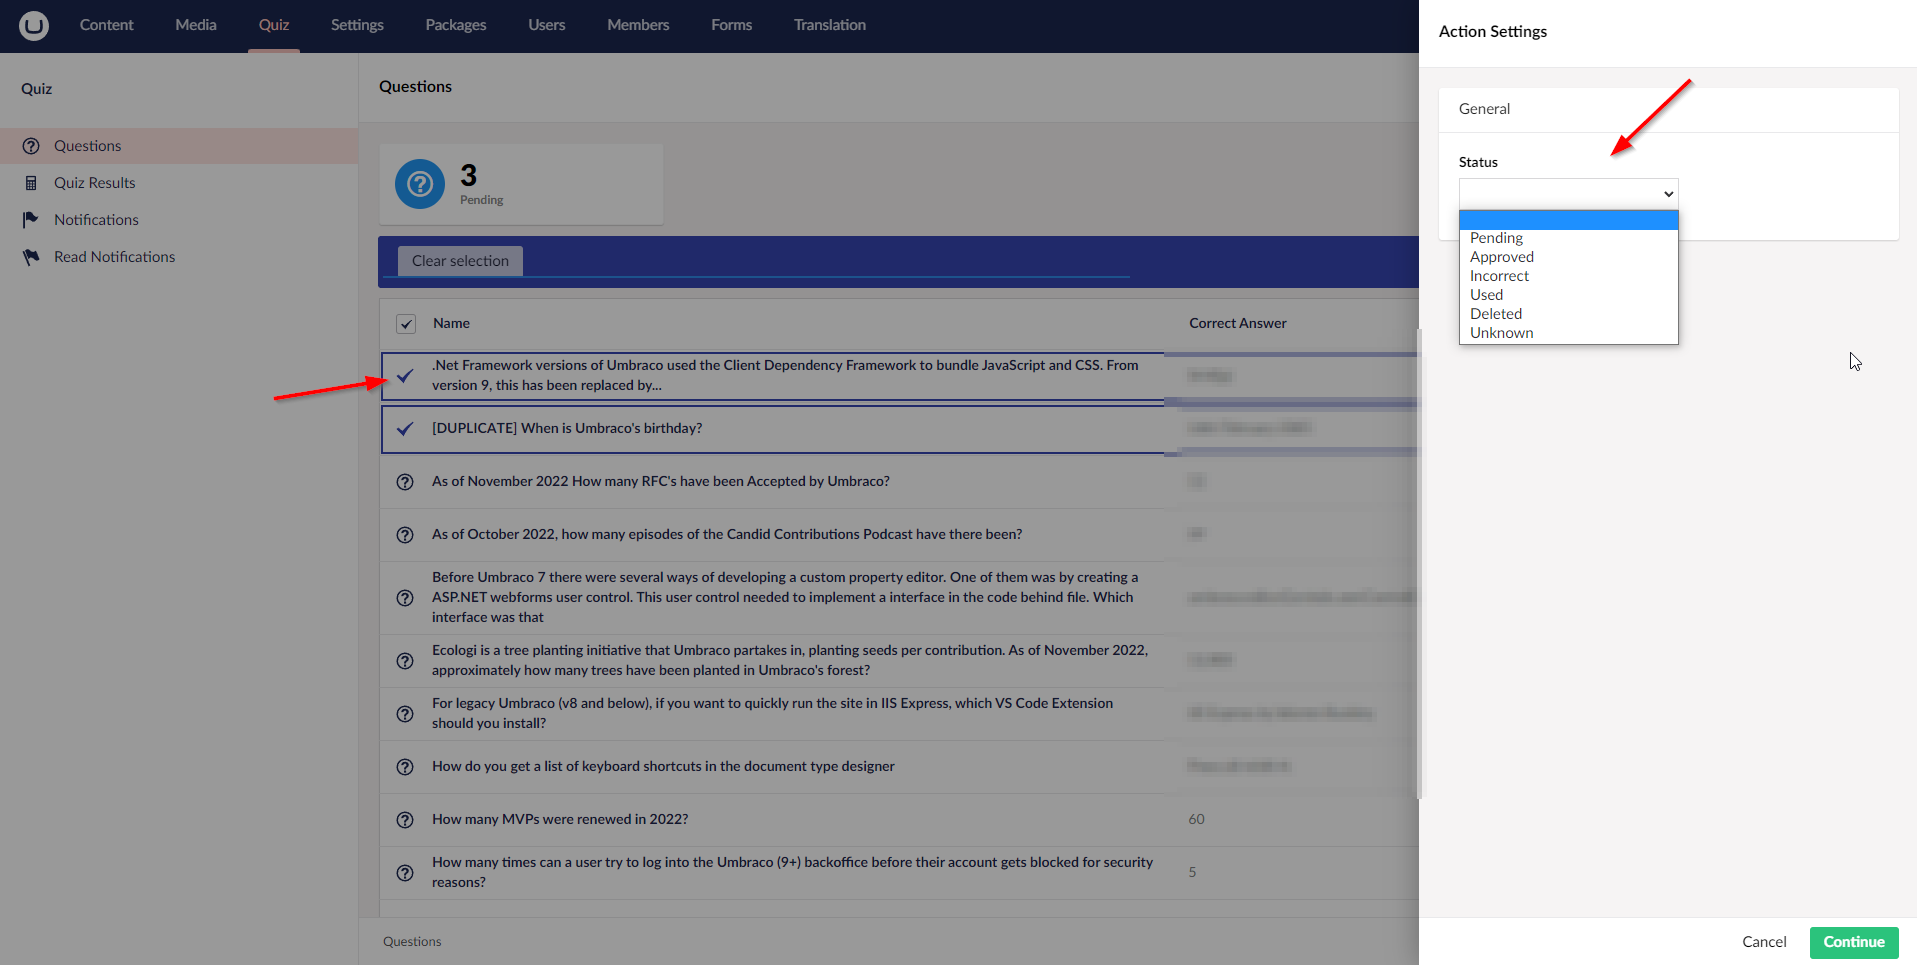 A screenshot of what Konstruk actions look like in the Umbraco backoffice